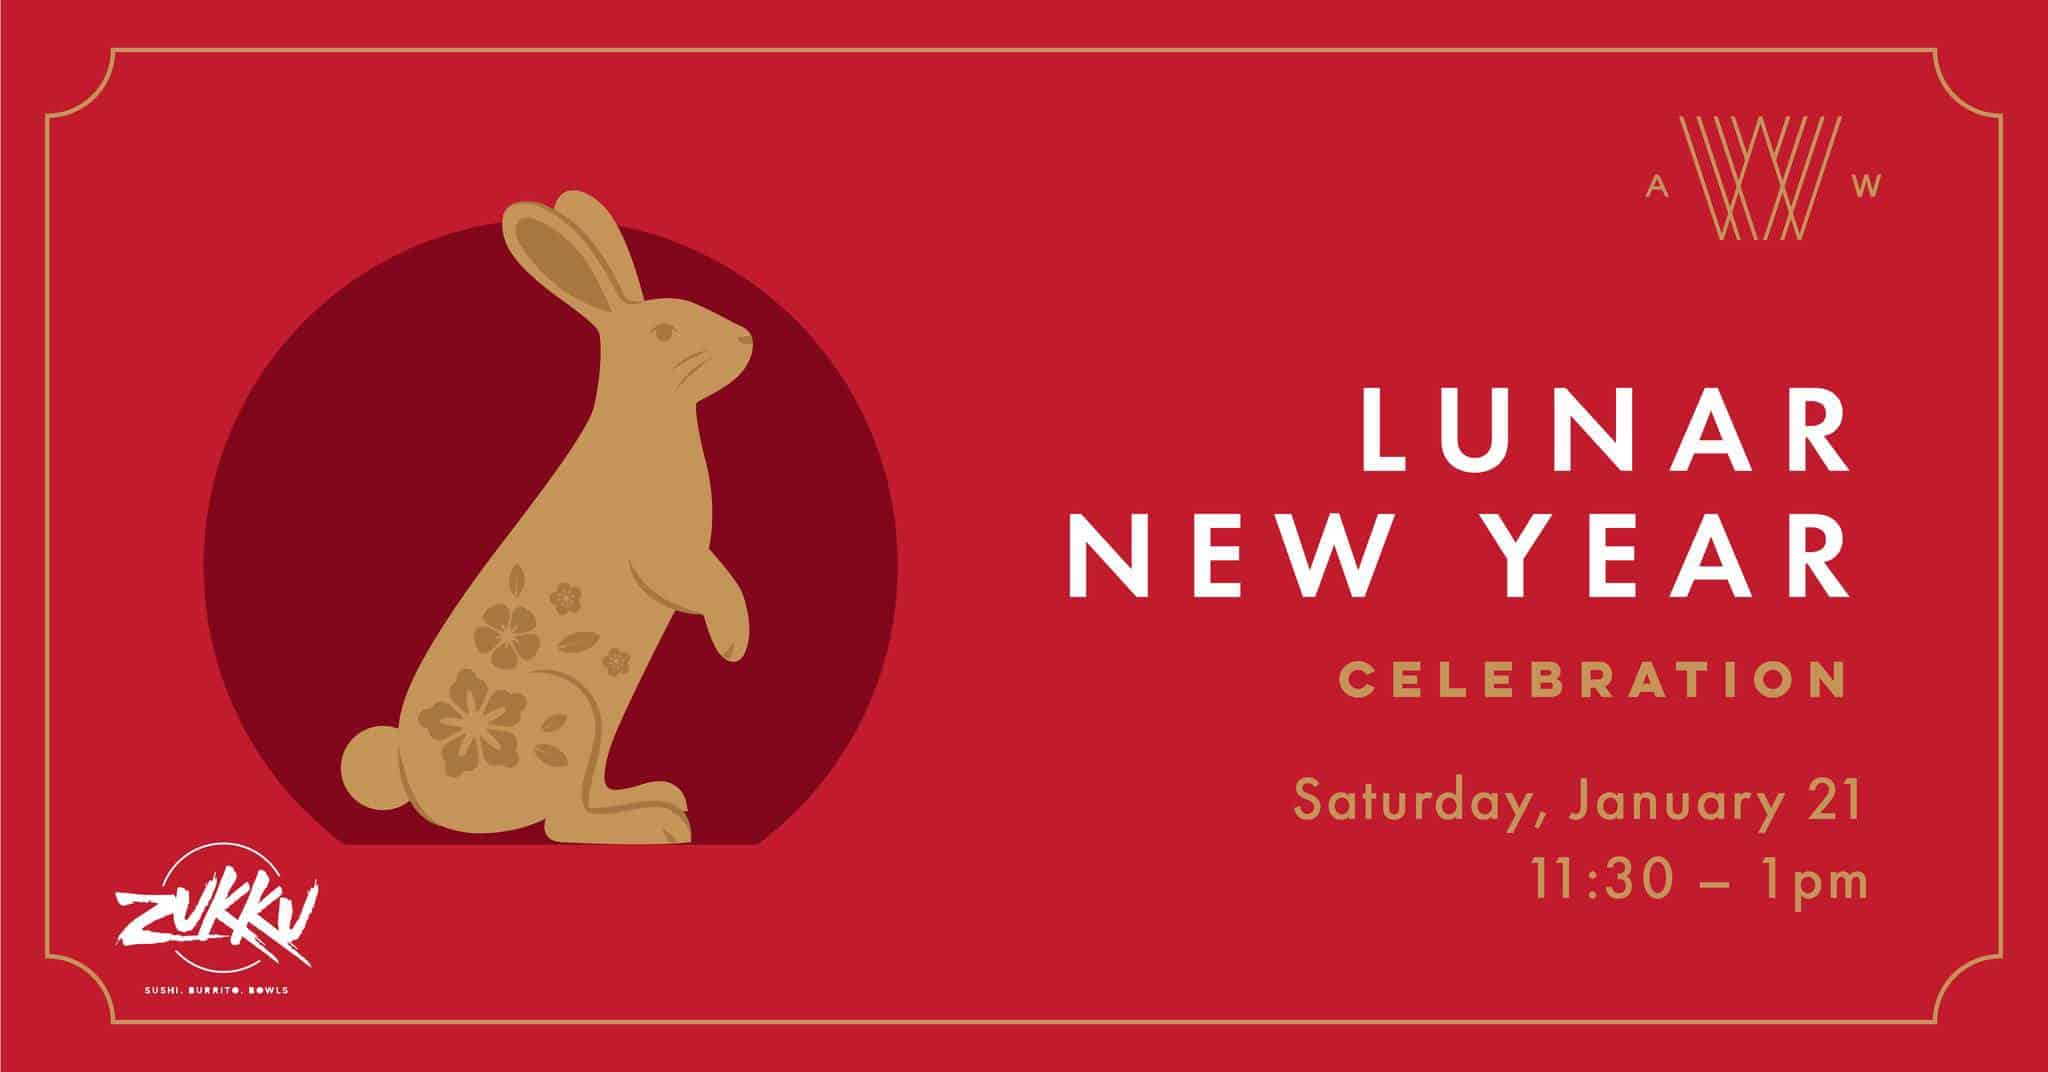 Lunar New Year at Armature Works